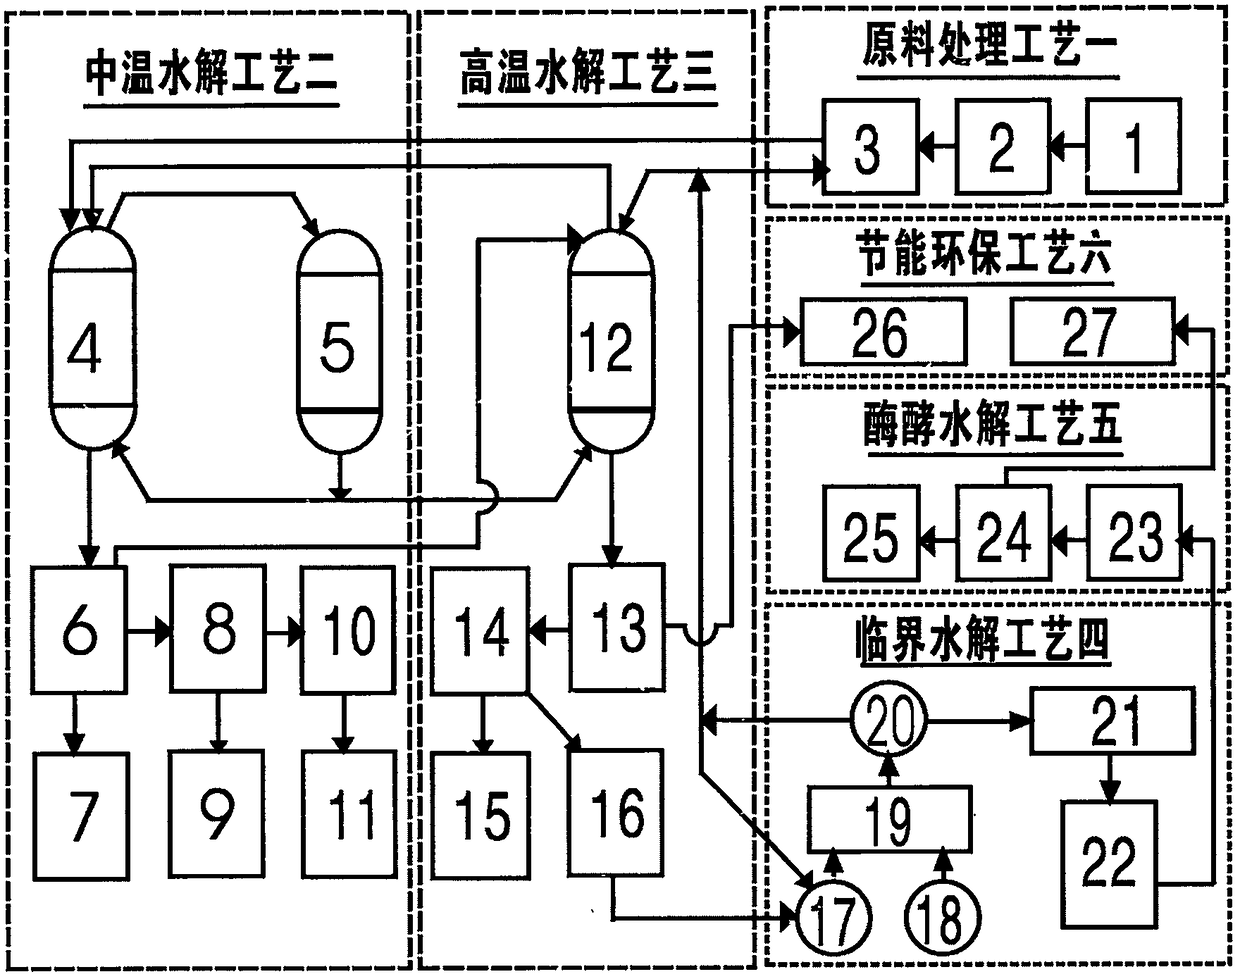 Industrial thermo-operated monosaccharide and alcohol ester hydrolysis technology system for plant straw